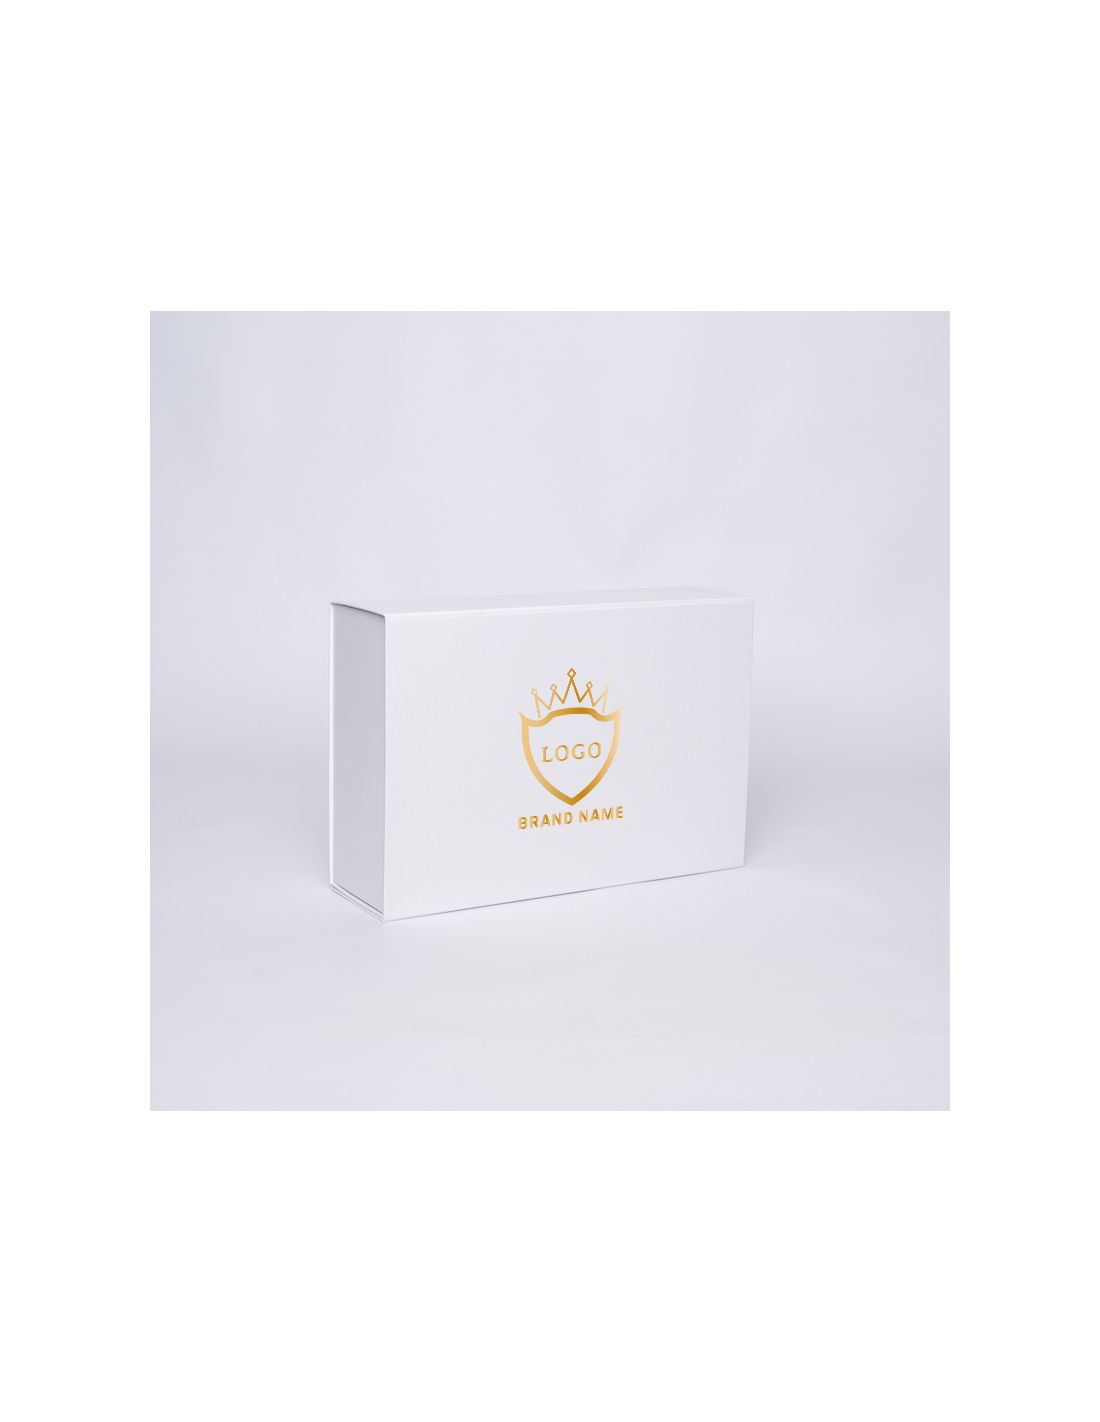 Customized Personalized Magnetic Box Wonderbox 33x22x10 CM | WONDERBOX | STANDARD PAPER | HOT FOIL STAMPING